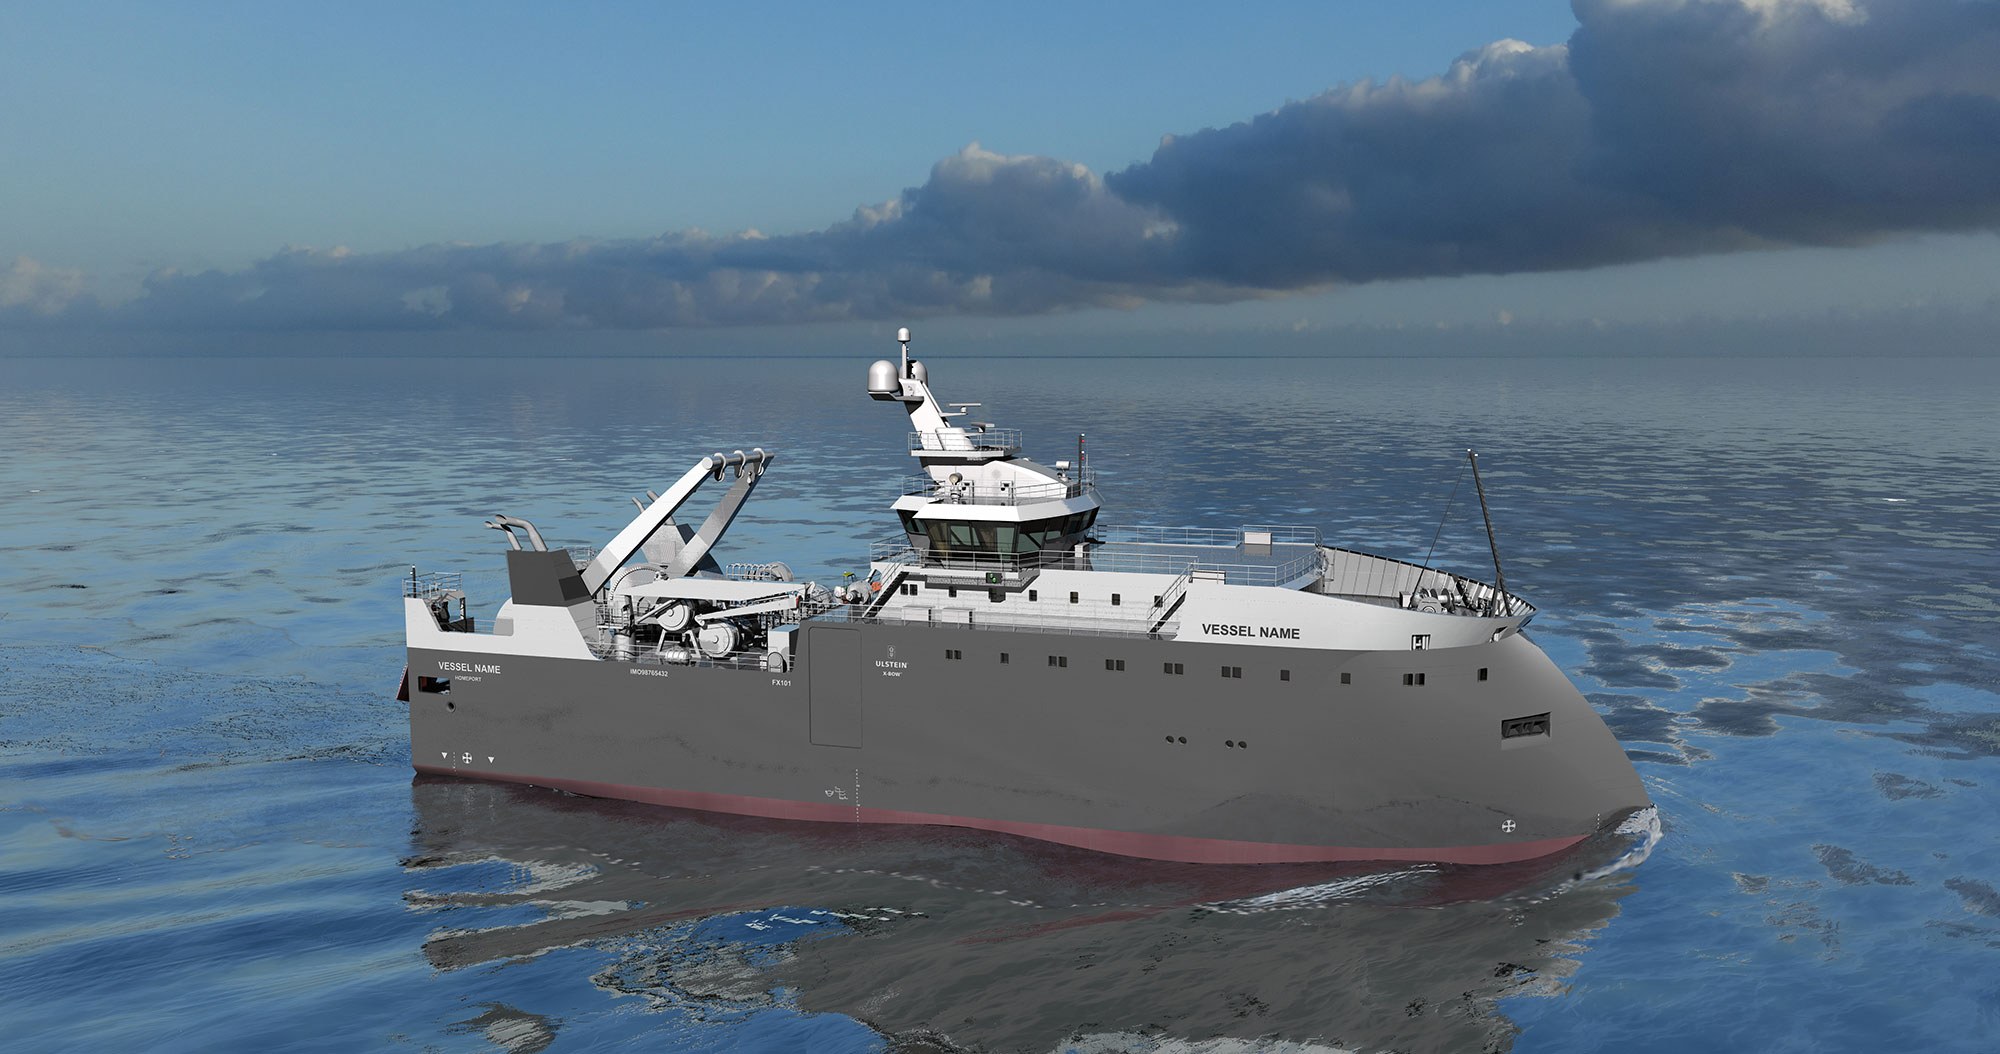 The next generation demersal trawler: An FX101 trawler design with a 1,900 to 2,300 m3 freezing hold capacity.